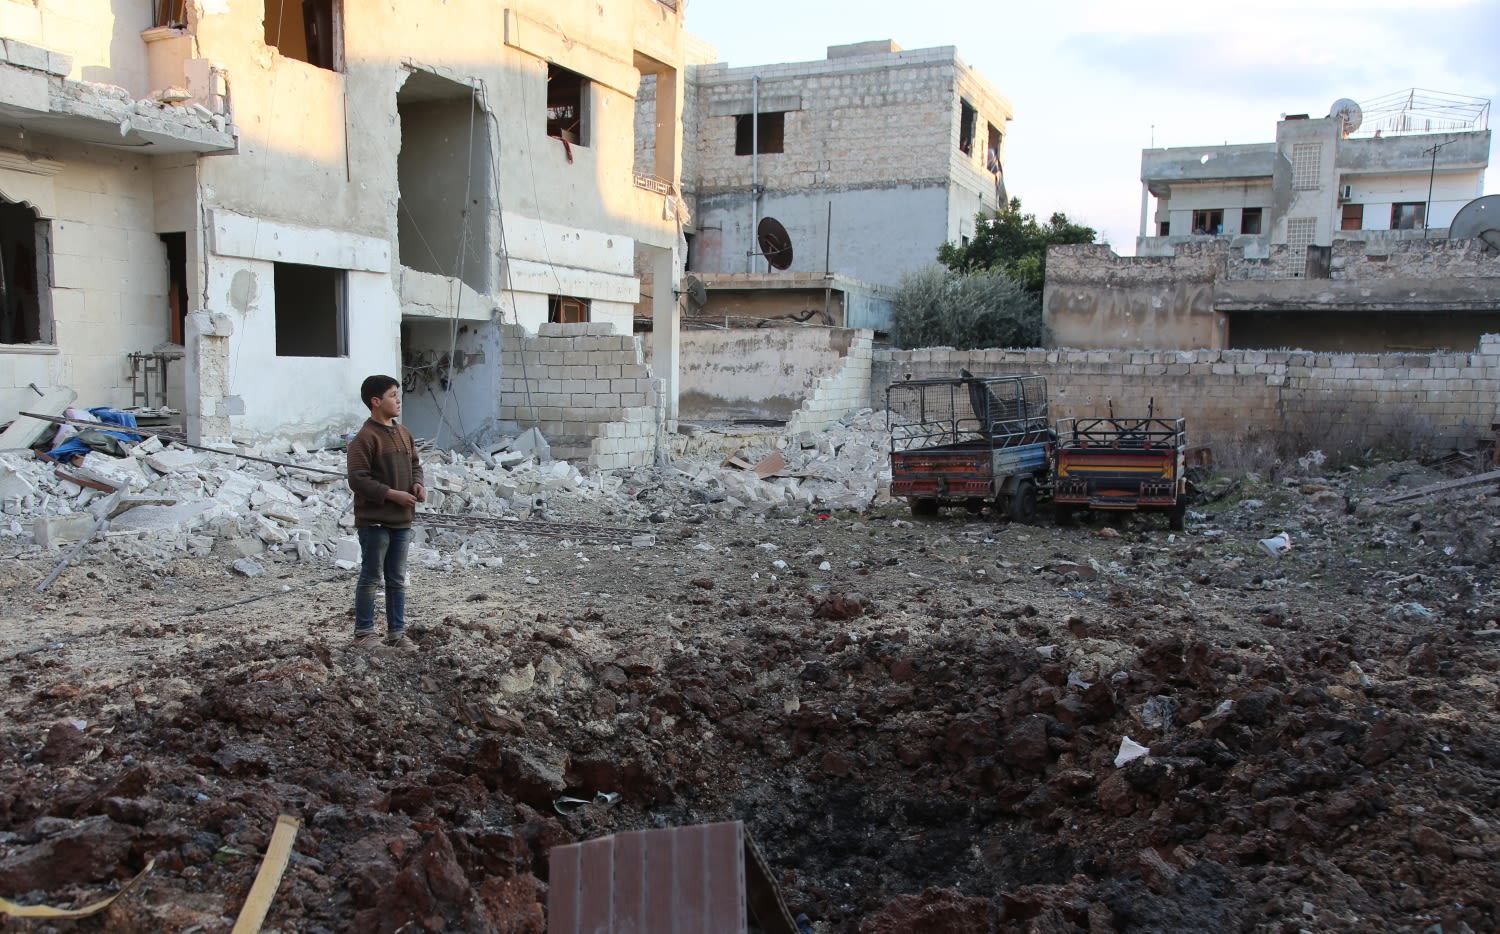 Destruction from airstrikes in Idlib, Syria.